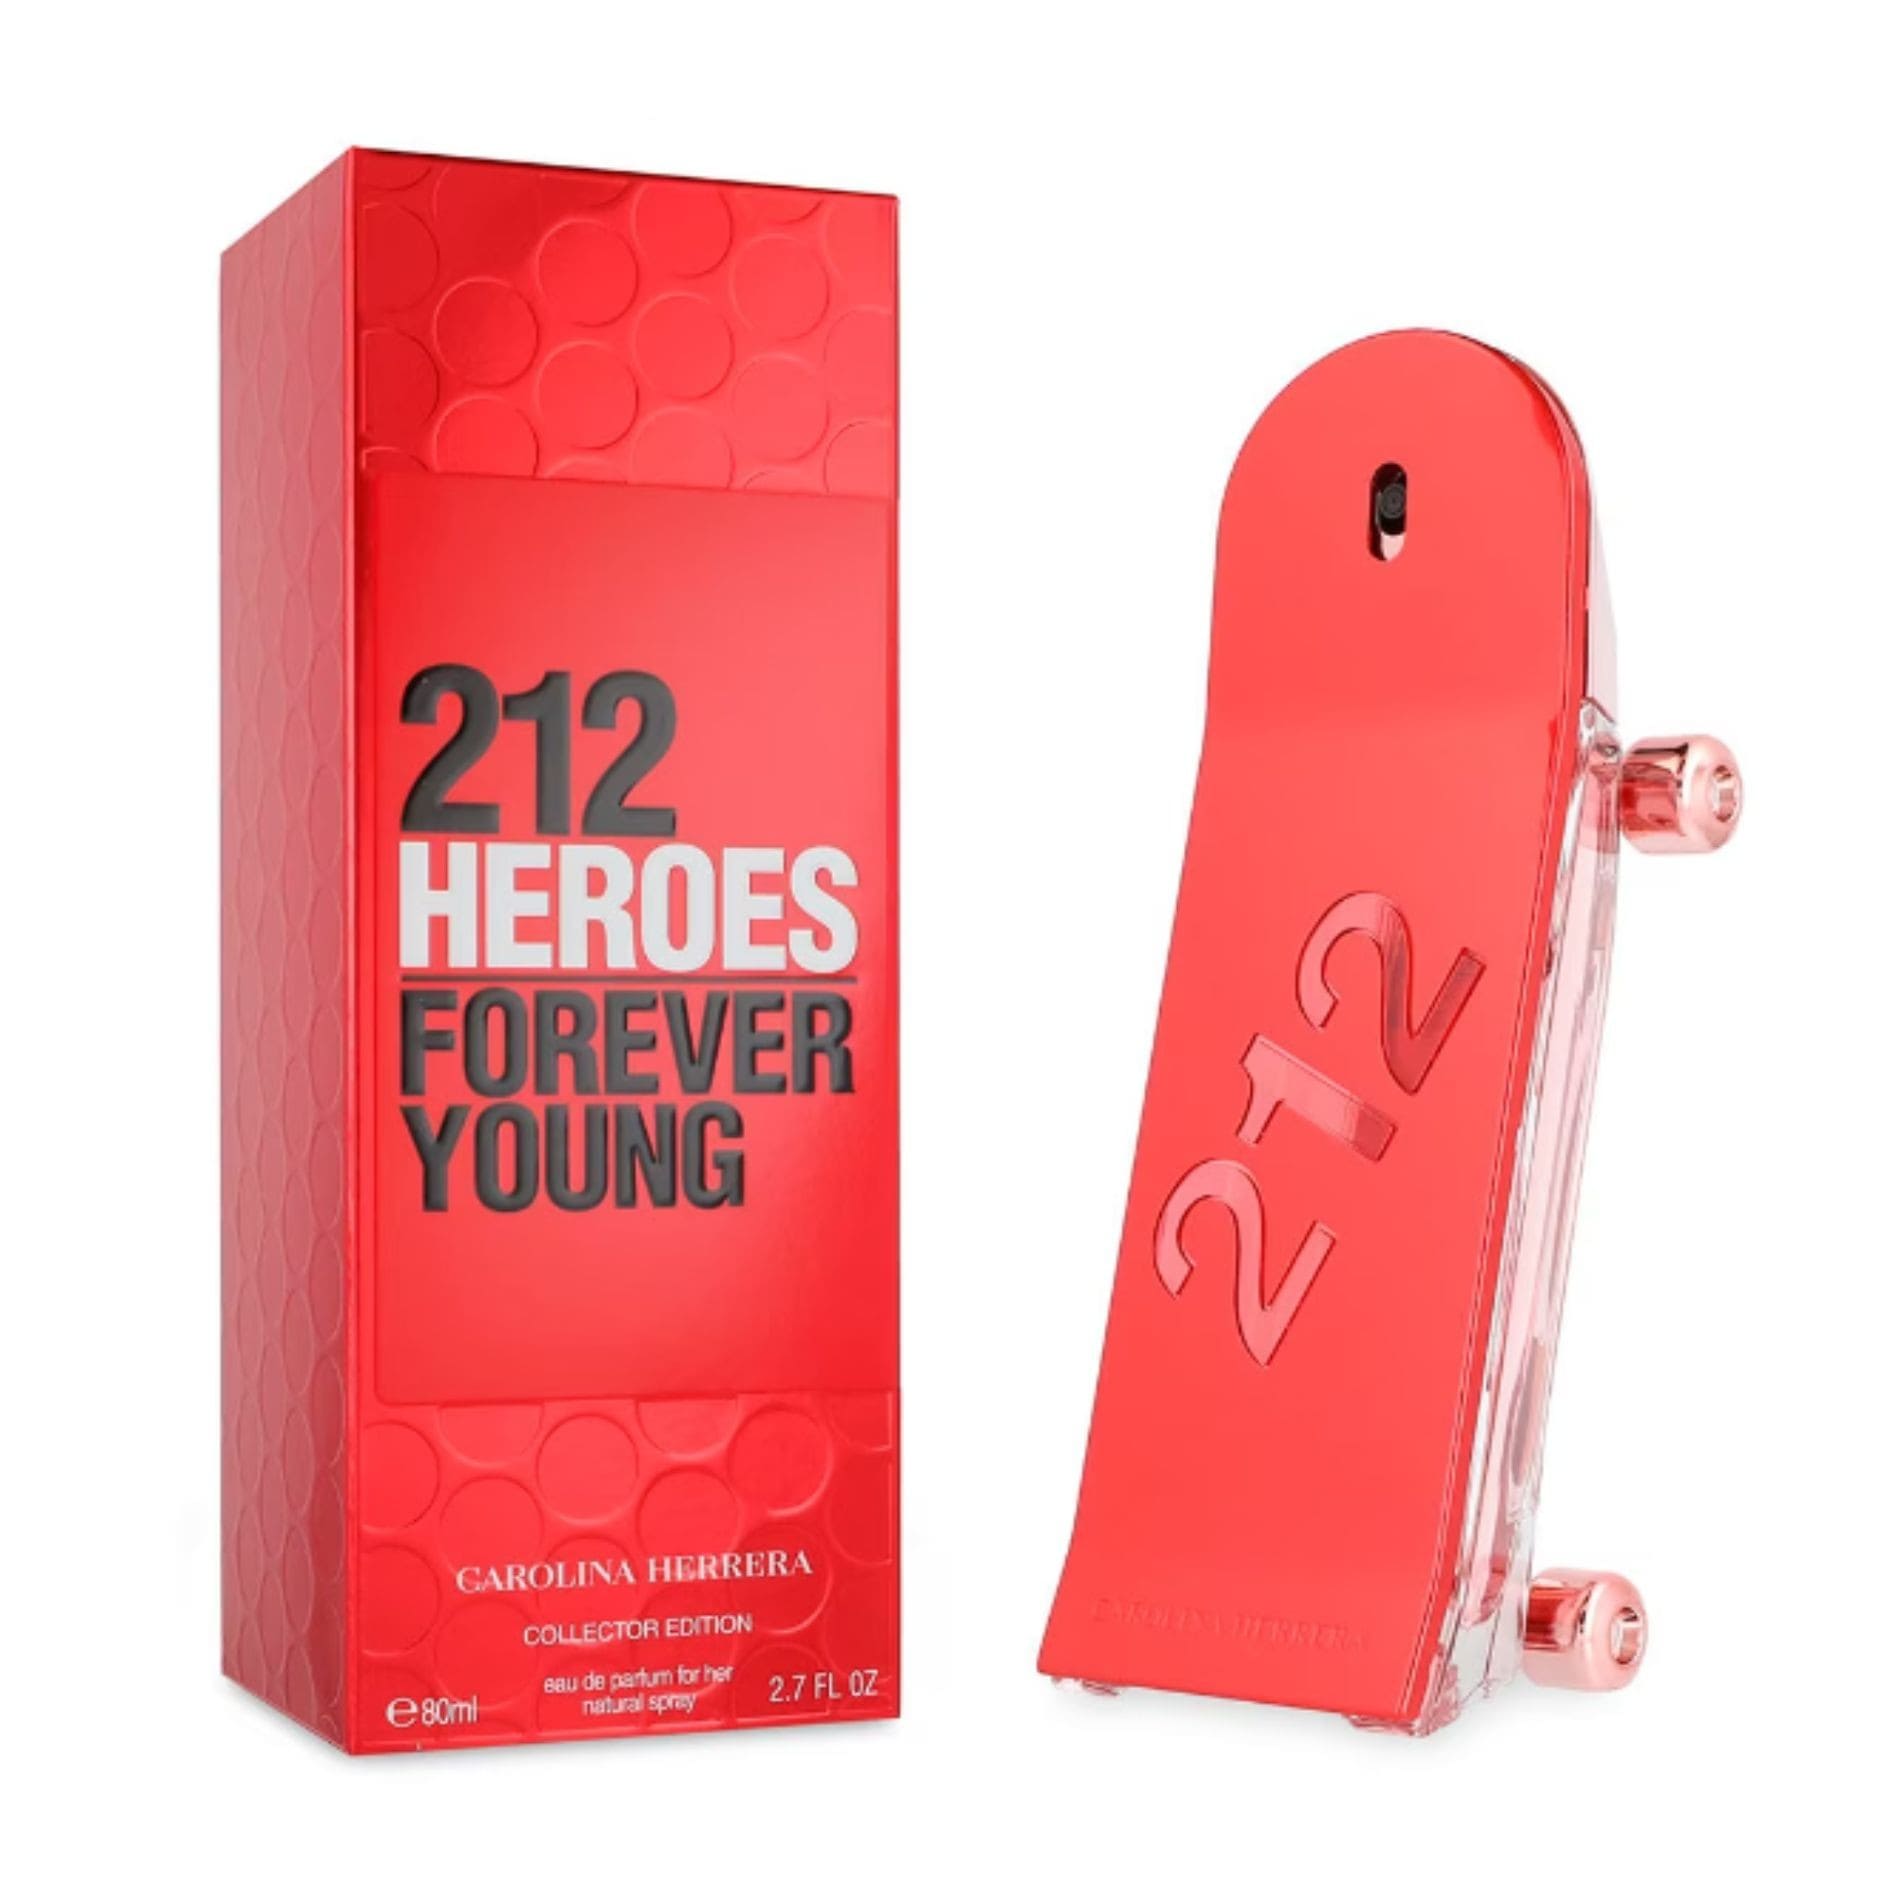 Perfume-Carolina-Herrera-212-Heroes-Forever-Young-Collector-Edition